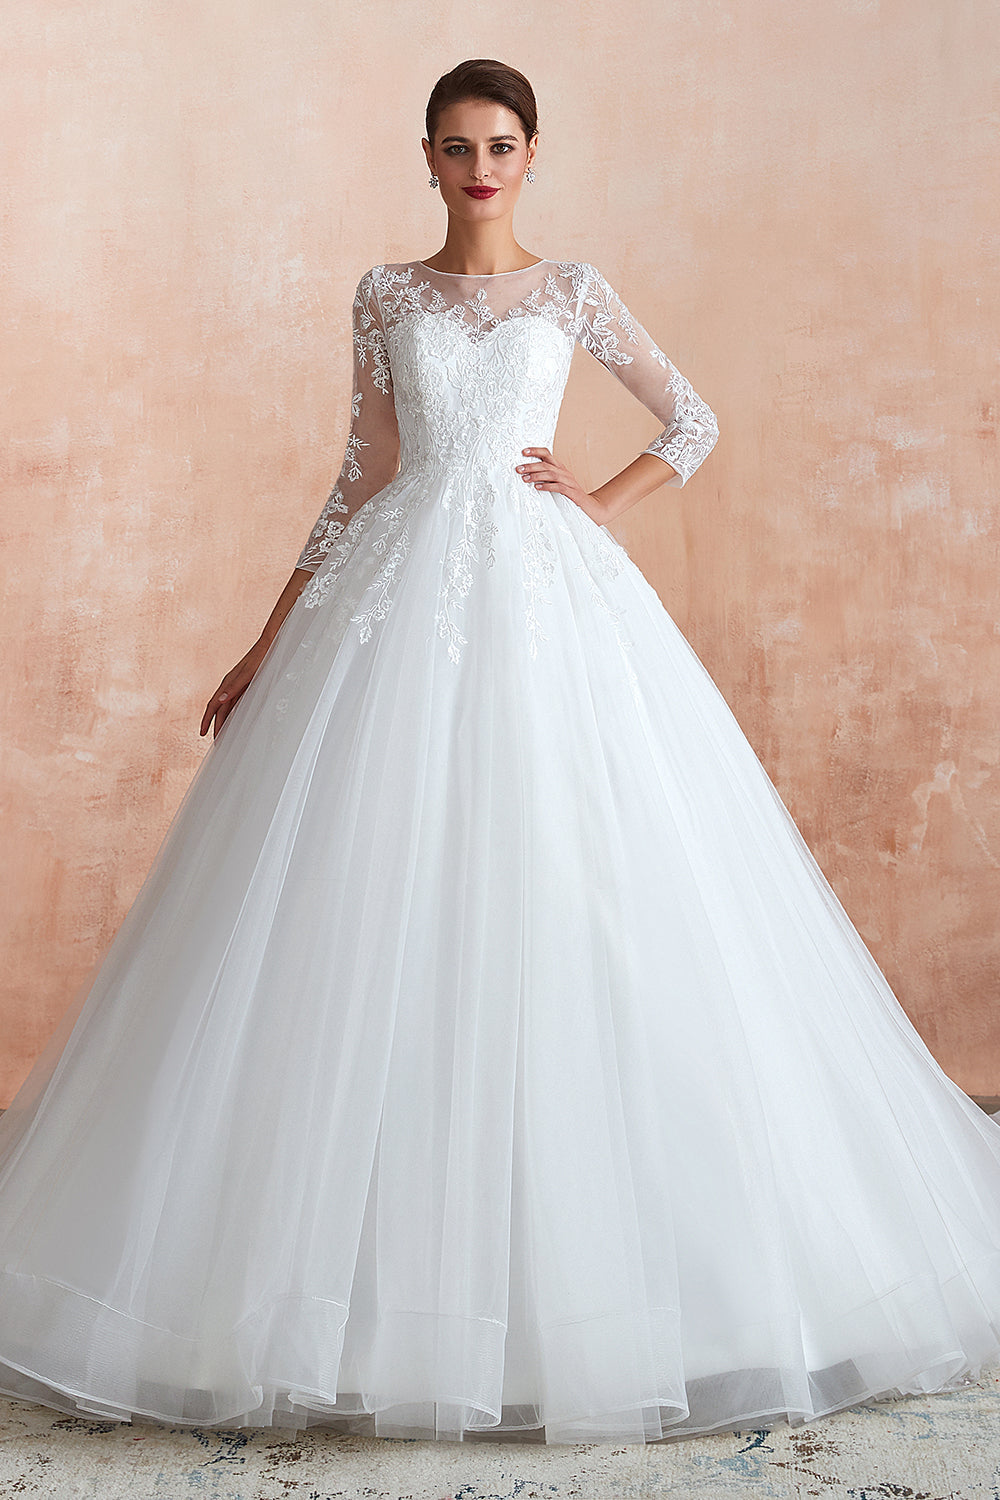 Affordable Lace Jewel White Tulle Wedding Dresses with 3/4 Sleeves-27dress